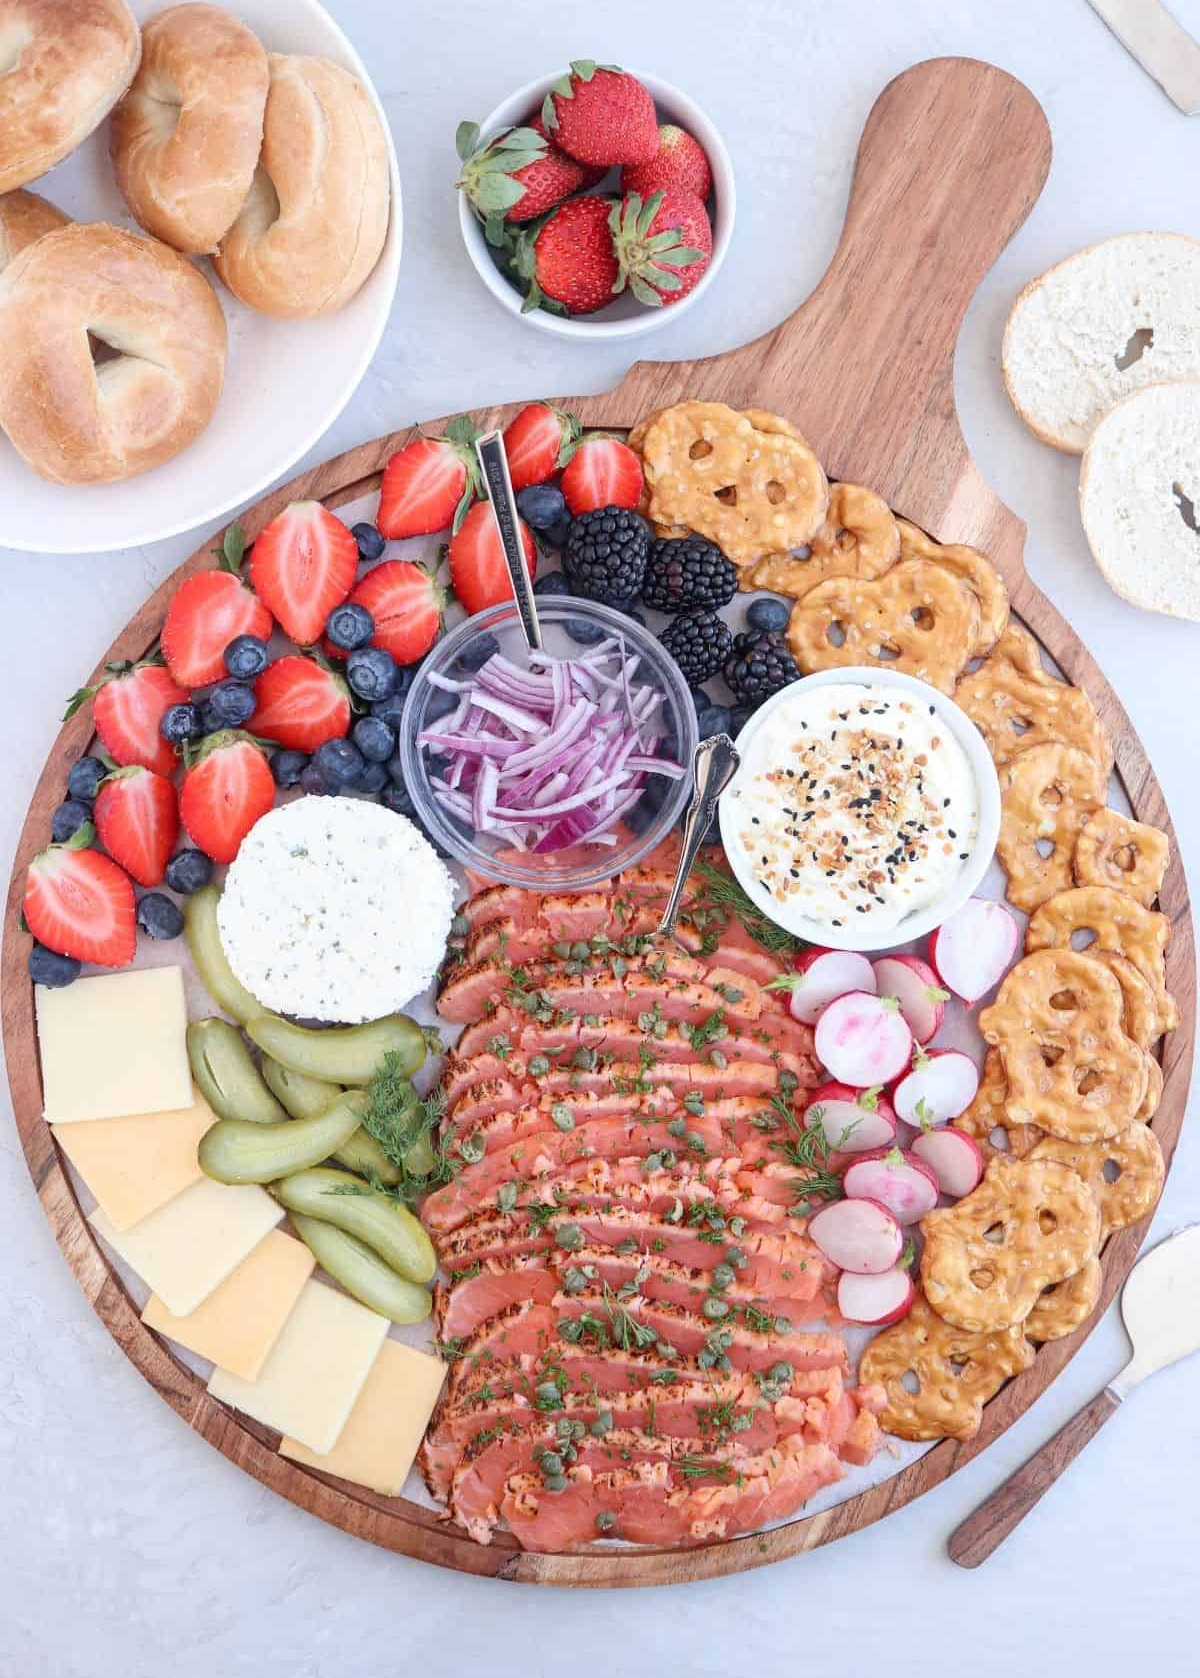 Wholly Tasteful's salmon board is filled with creamy cheese, strawberries, salmon, and berries.